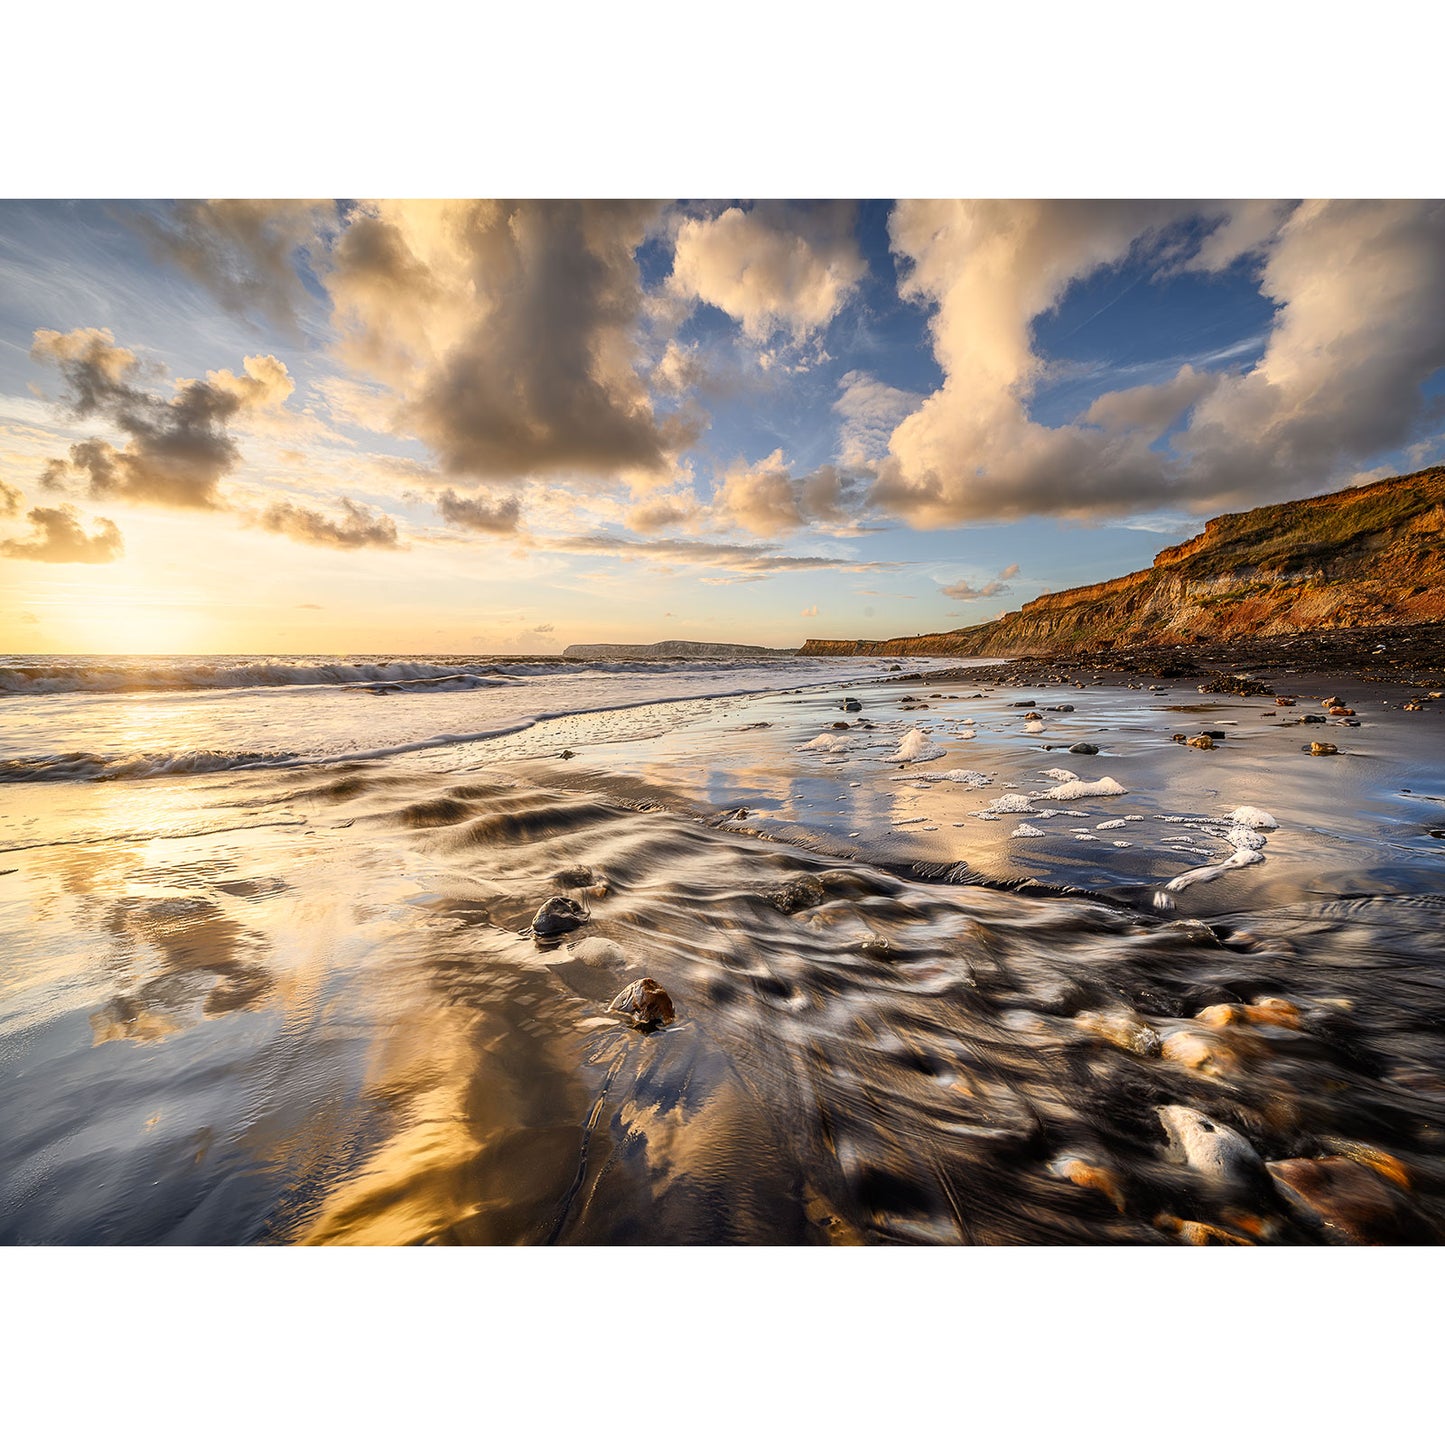 Brook Bay sunset reflecting on a rippled beach with cliffs in the distance on the Isle of Wight by Available Light Photography.